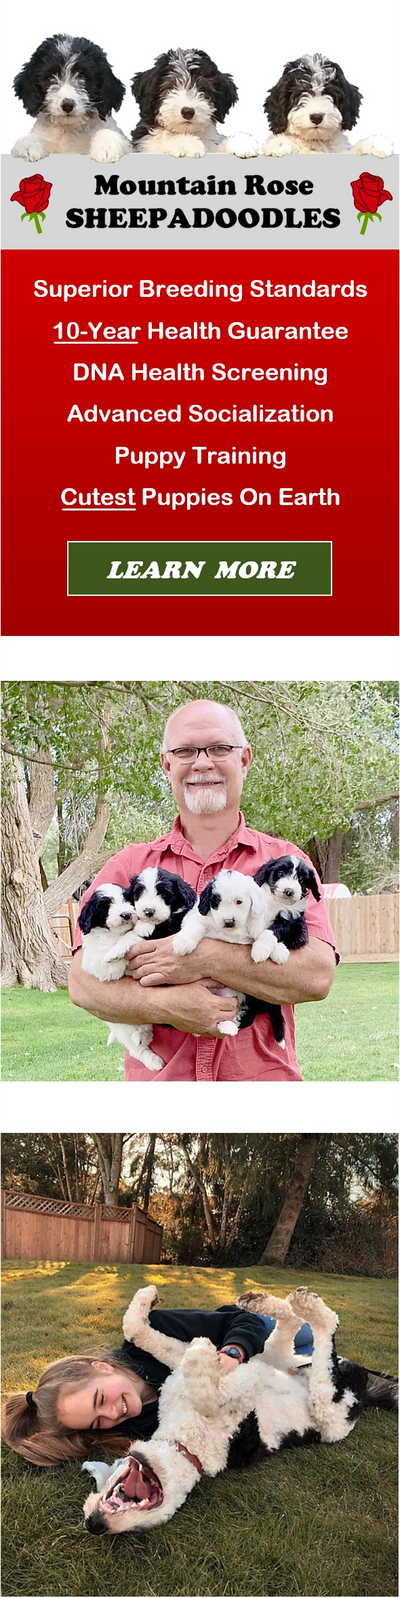 Man holding sheepadoodle puppies and girl playing with her dog